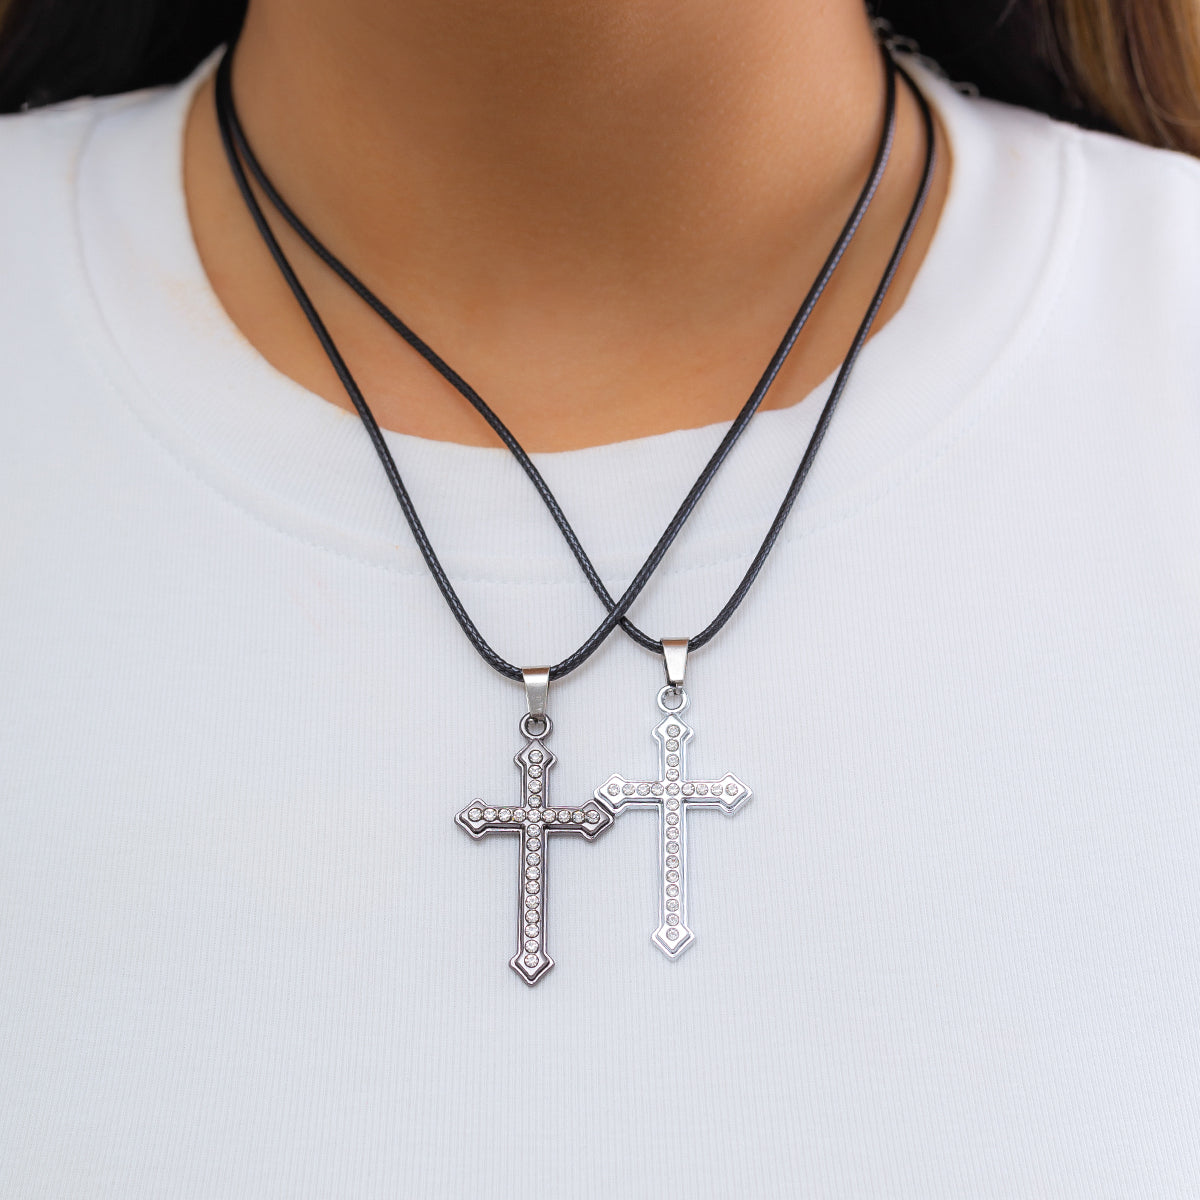 Cubic Zirconia & Silver-Plated Cross Pendant Necklace Set